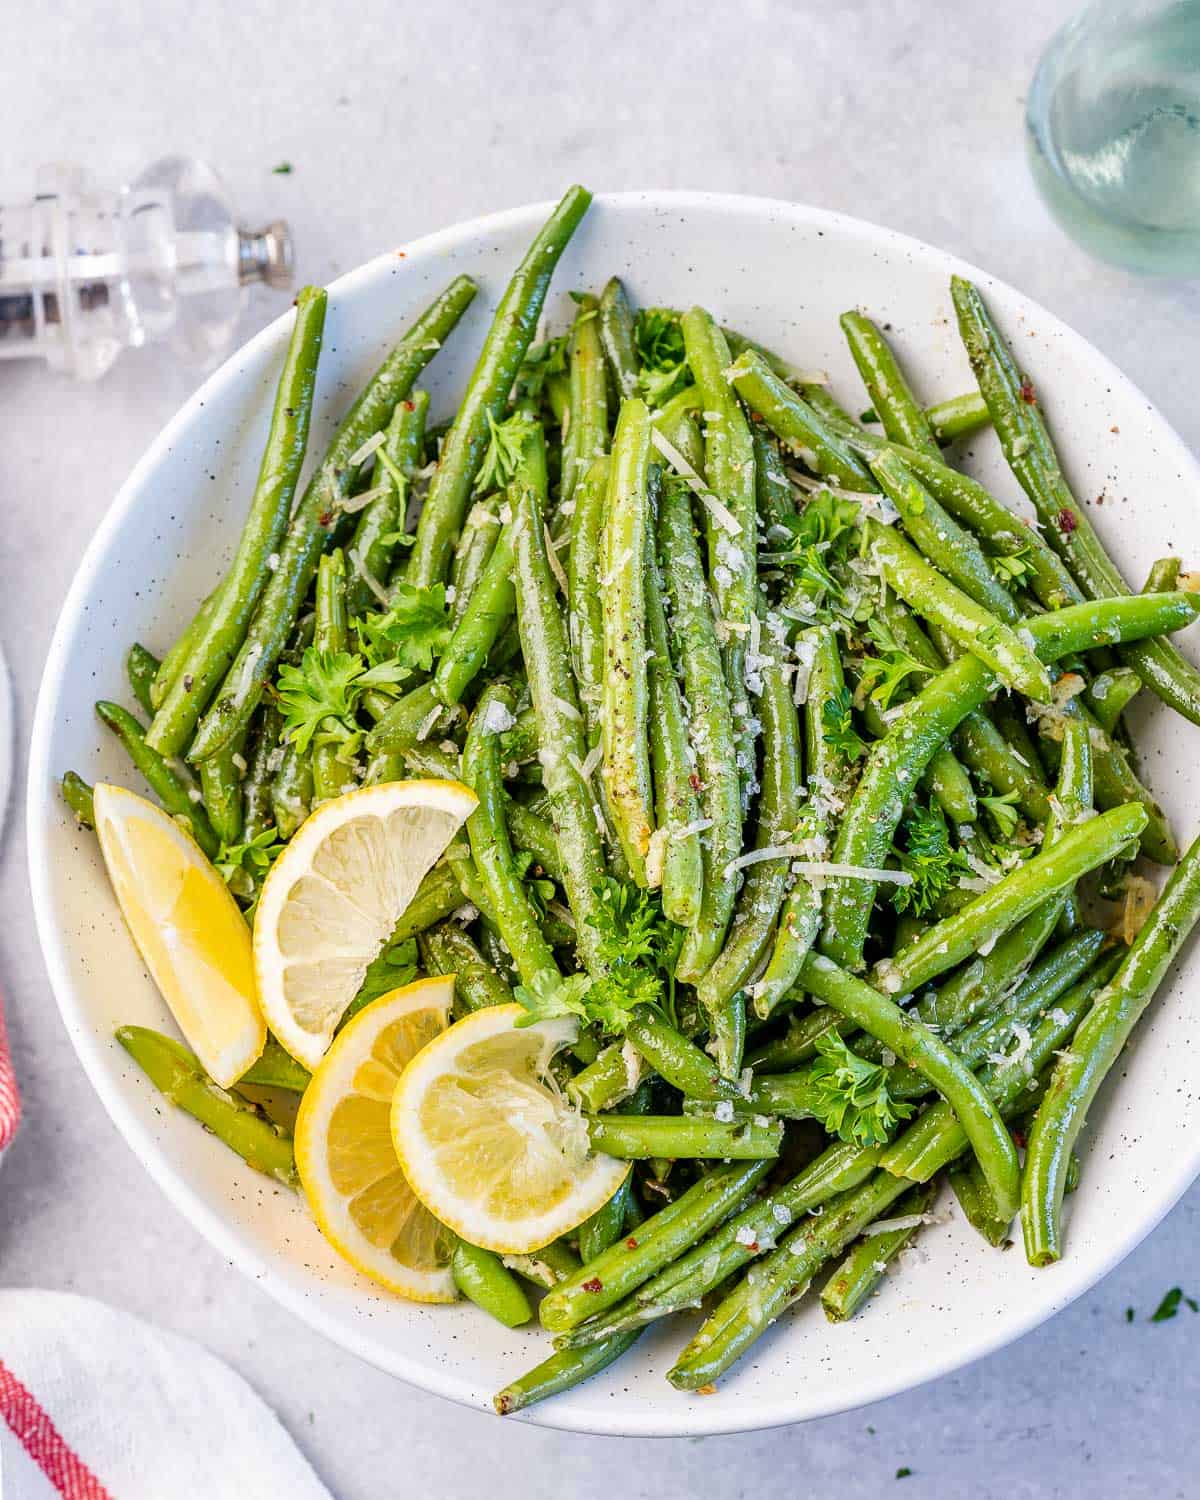 Oven Roasted Garlic Parmesan Green Beans - Healthy Fitness Meals